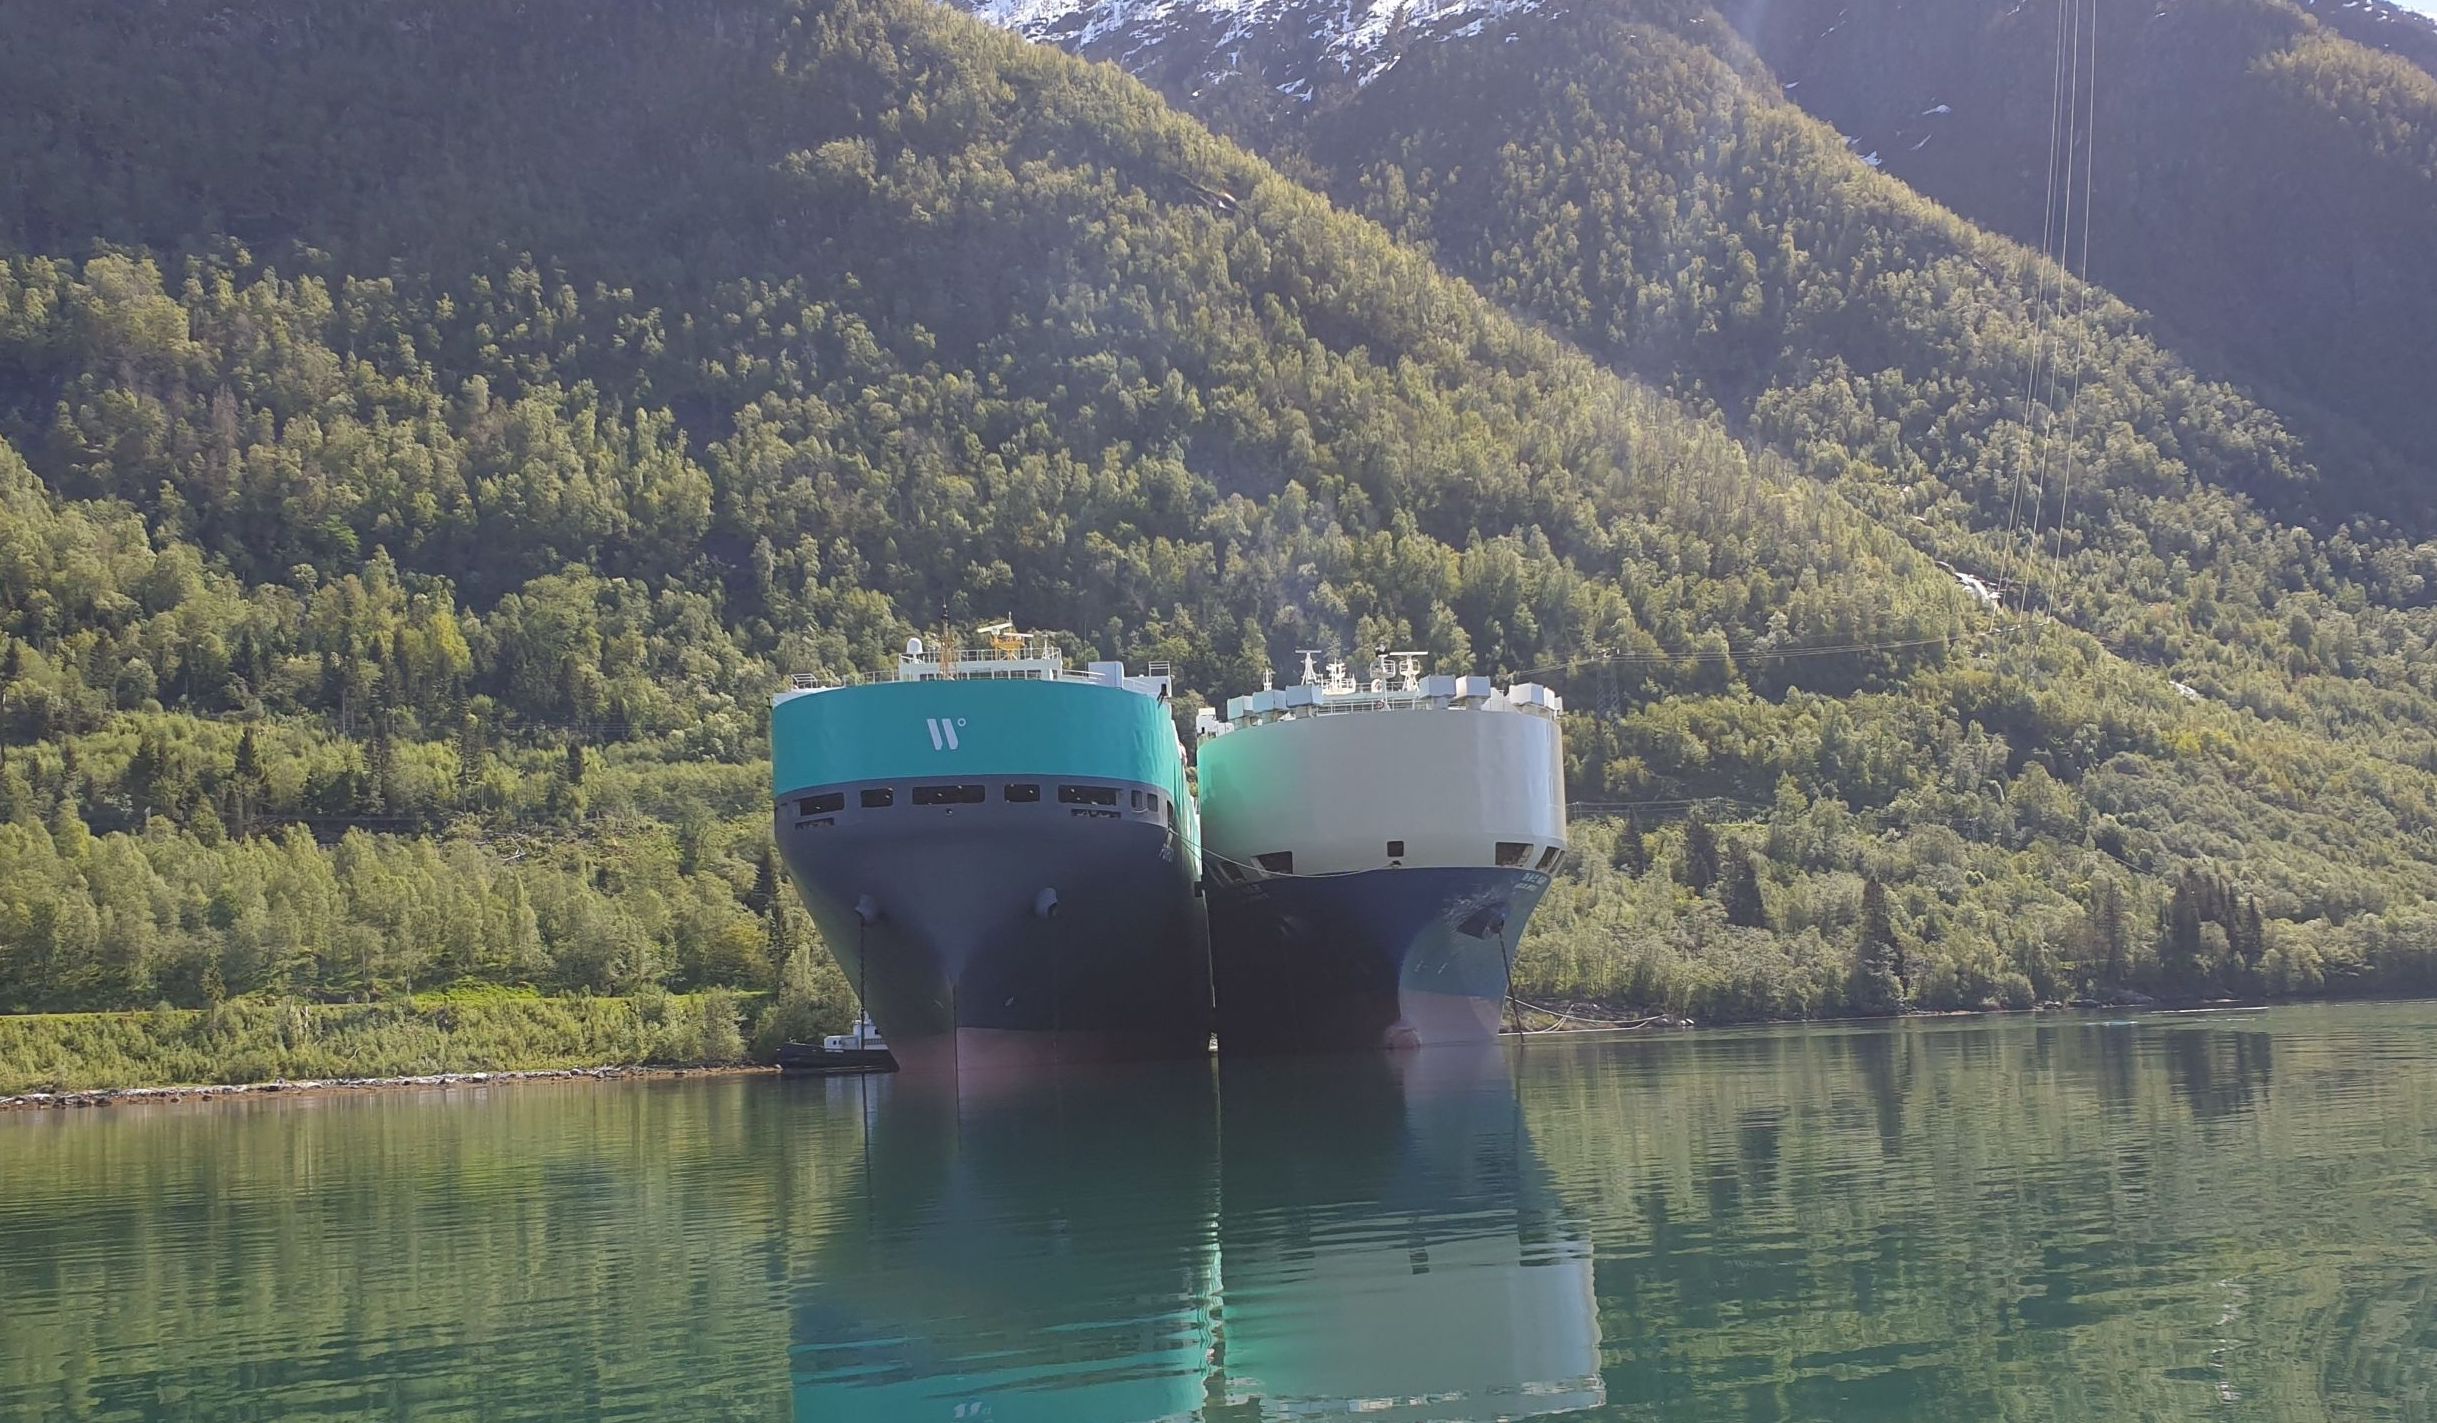 Wallenius Wilhelmsen to Reactivate Ships from Cold Lay-Up